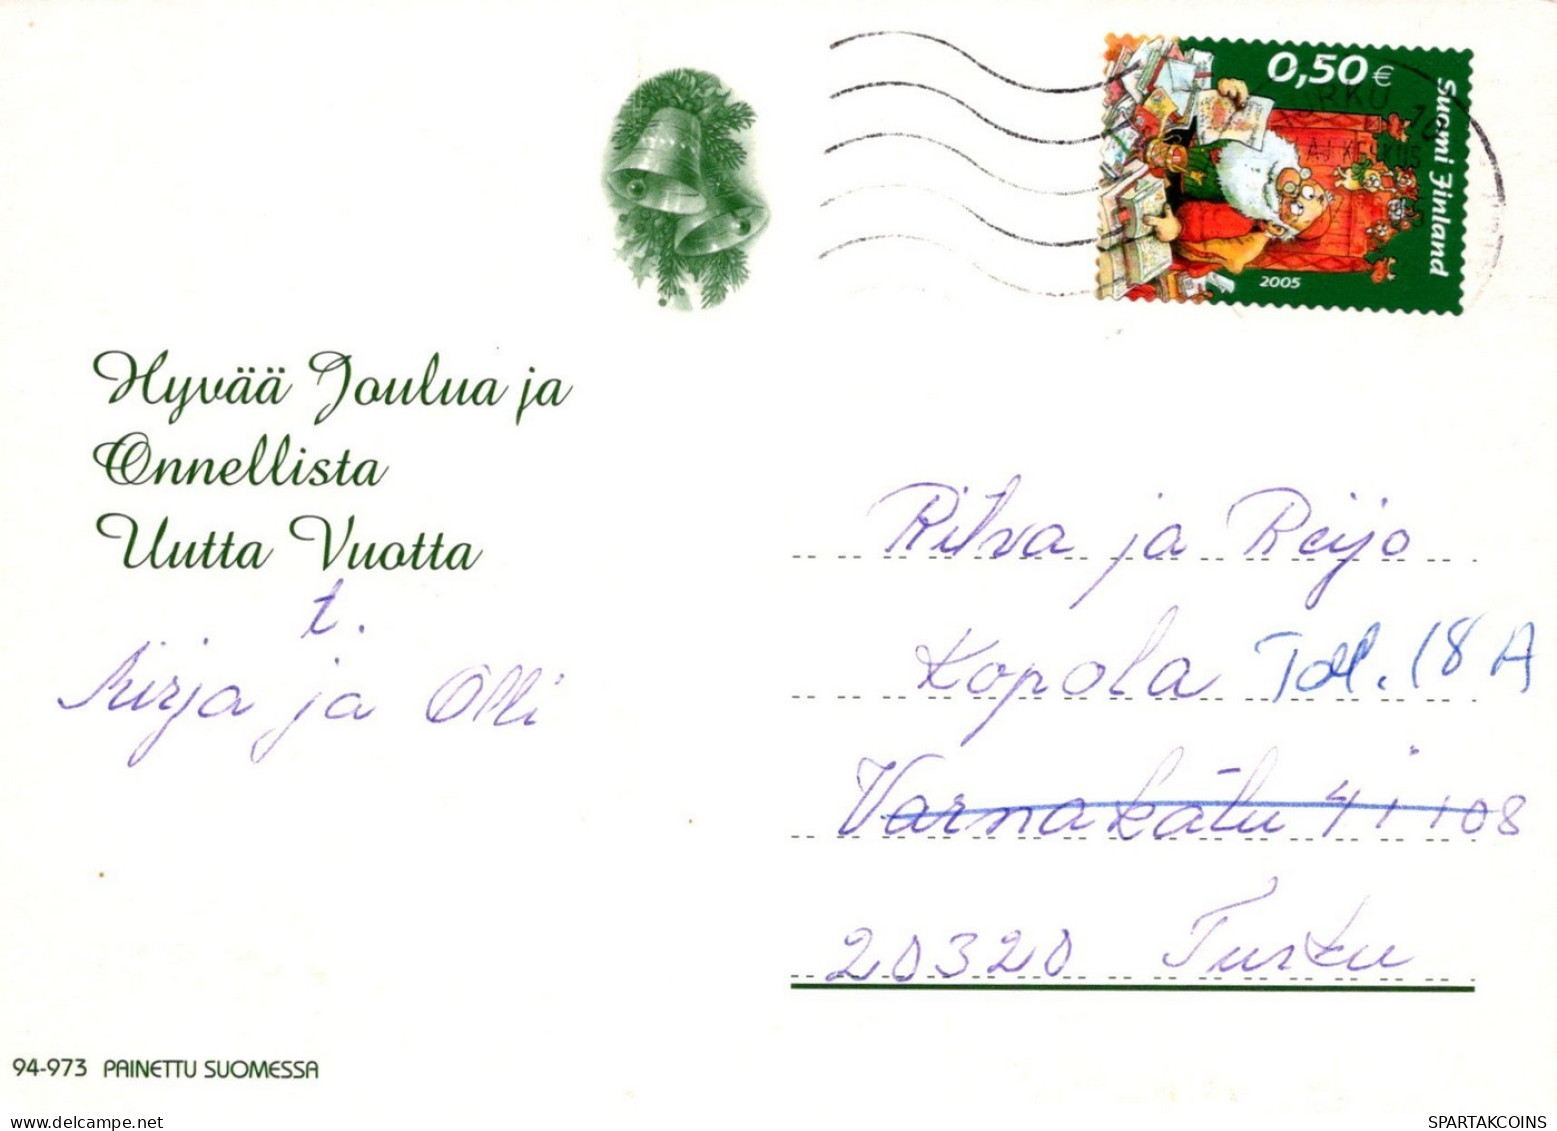 ANGELO Buon Anno Natale Vintage Cartolina CPSM #PAJ182.IT - Anges